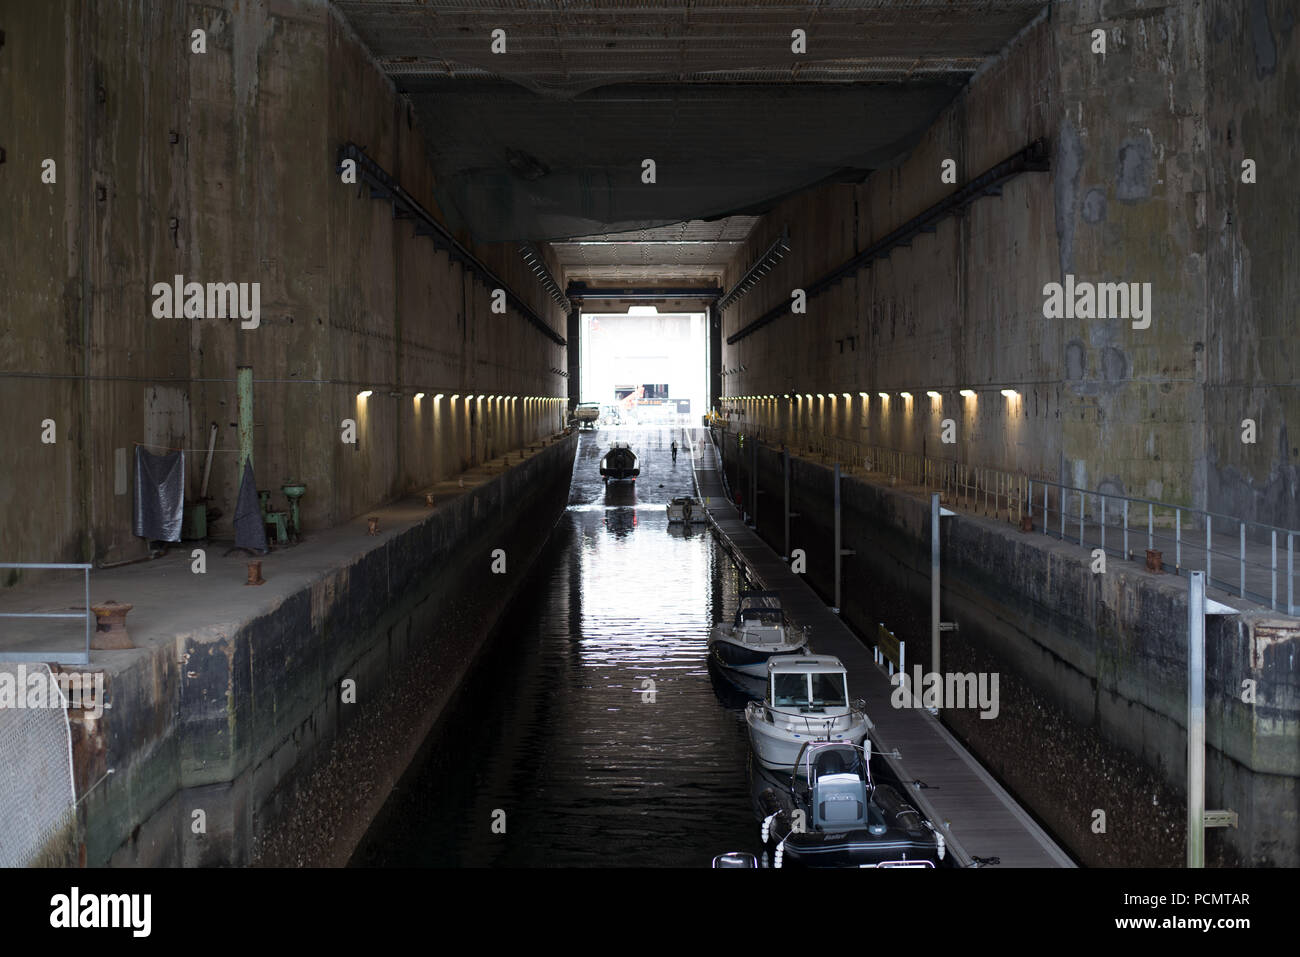 19.07.2018, France, Brittany, Lorient: A dock in the former German submarine bunker Keroman 1. The submarine bunkers in Lorient were built during the Second World War on behalf of the Wehrmacht under the direction of the organization Todt (OT). Photo: Ralf Hirschberger / dpa | usage worldwide Stock Photo